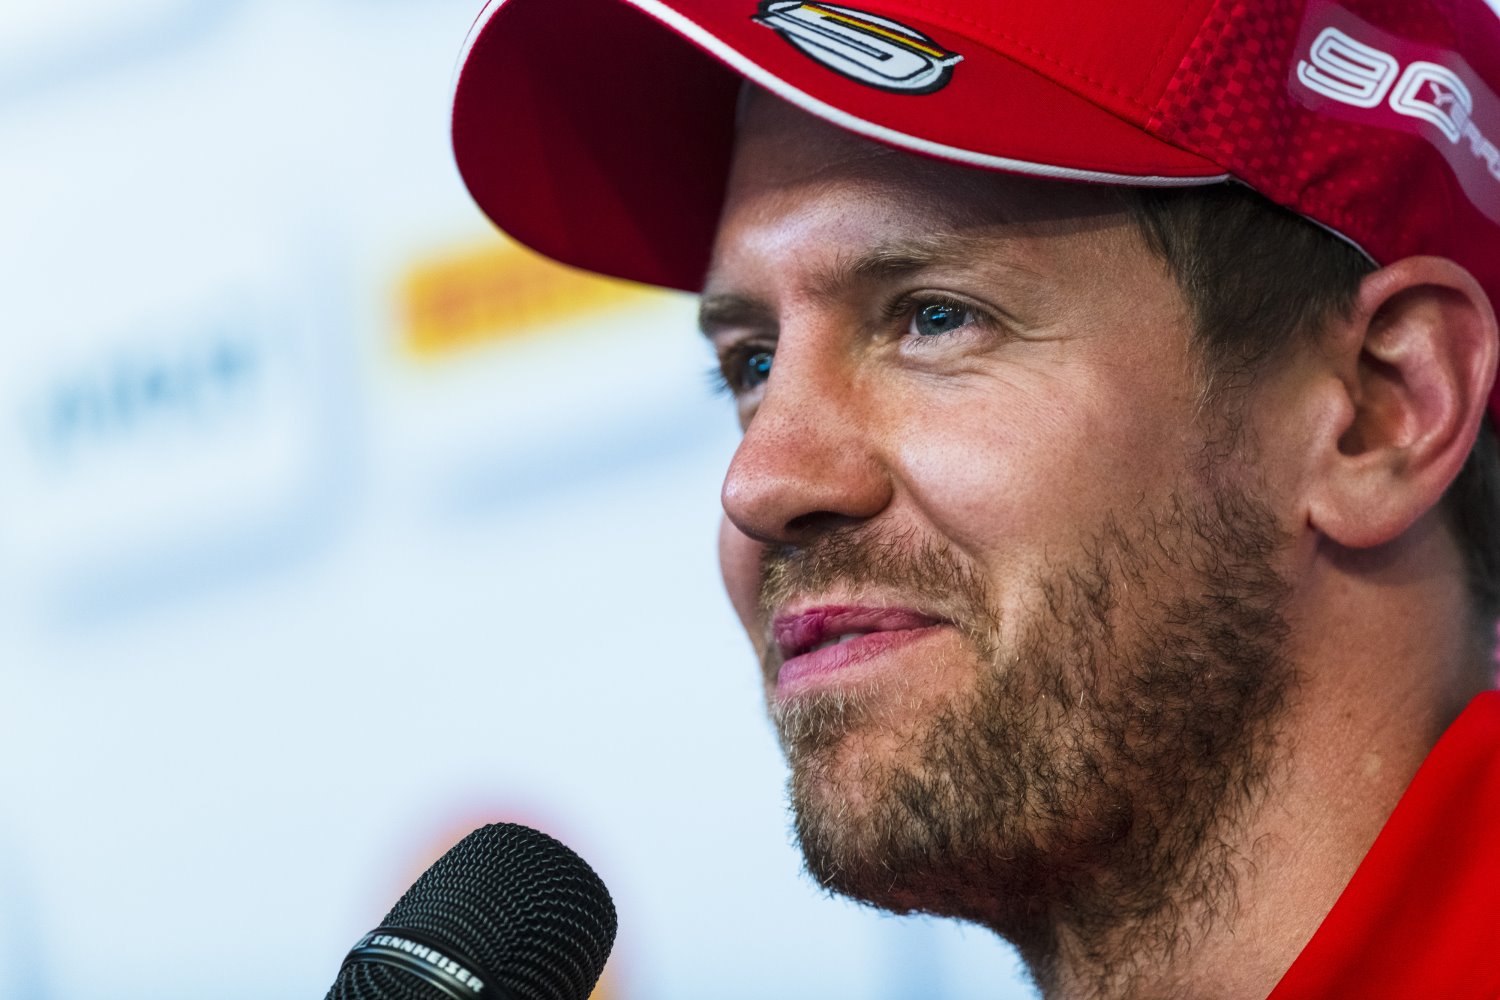 It seems likely Vettel is disillusioned with F1 and will retire soon